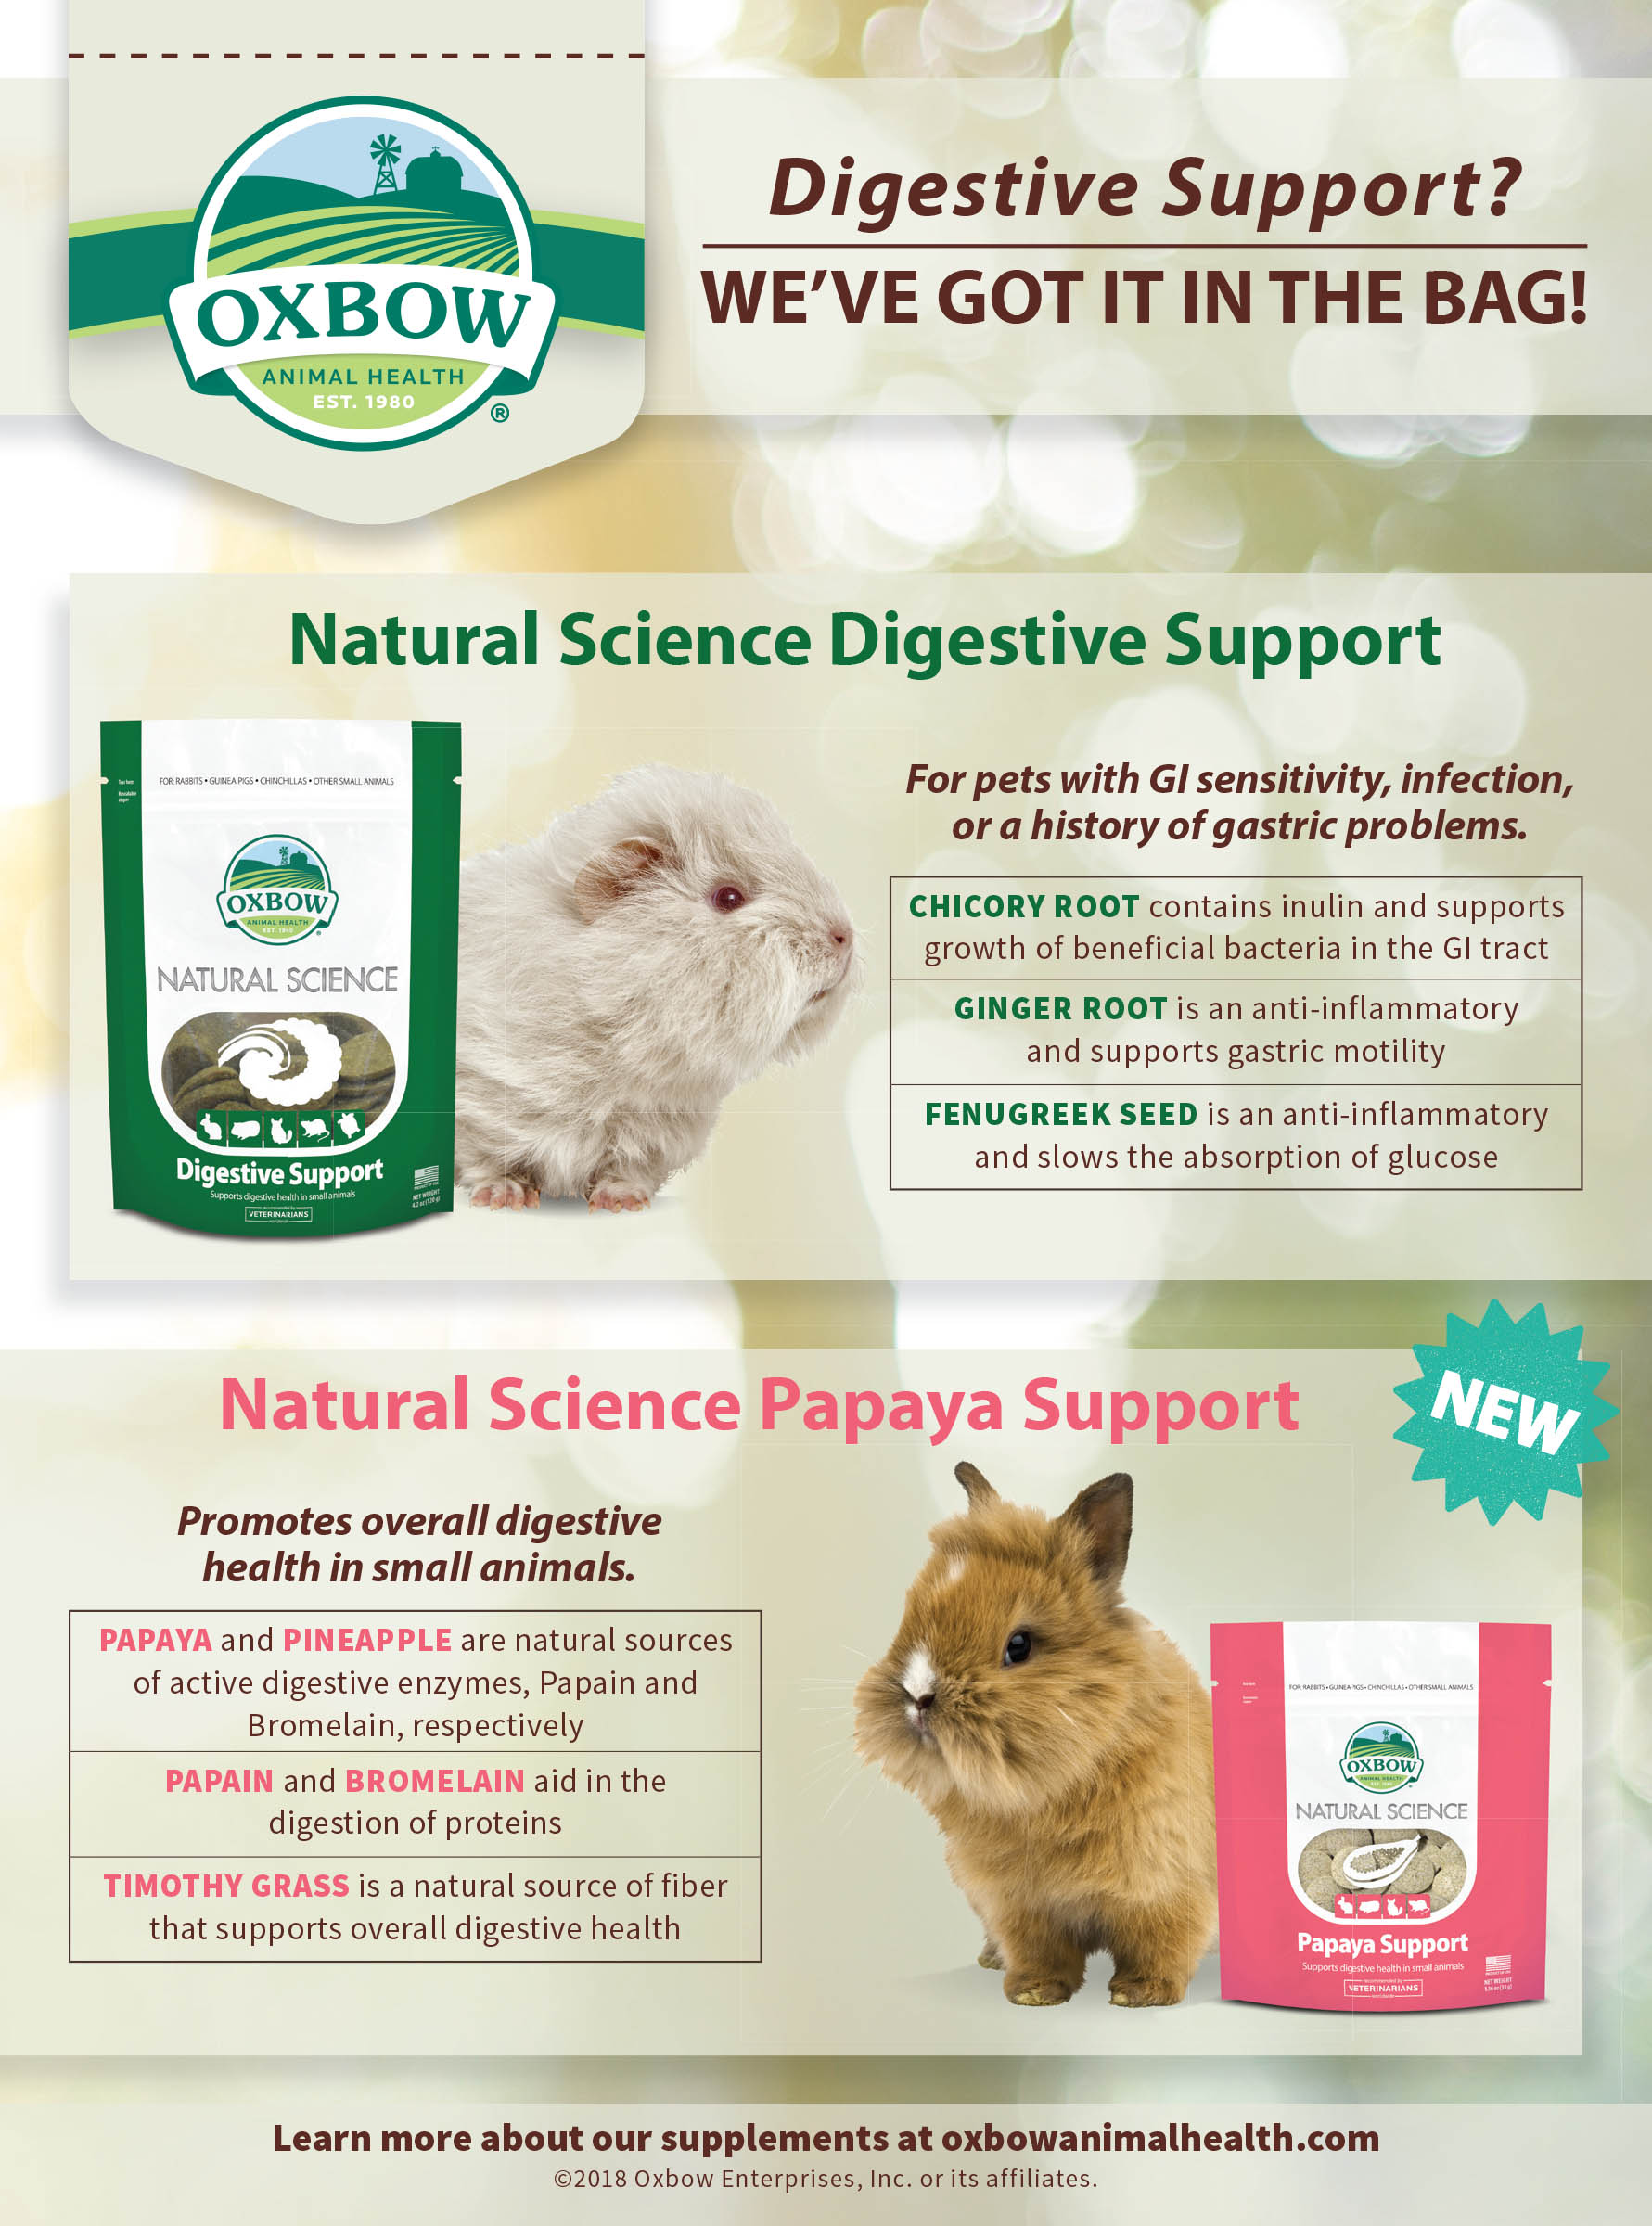 Which is better for my pet: Natural Science Digestive Support, or Natural Science Papaya Support?